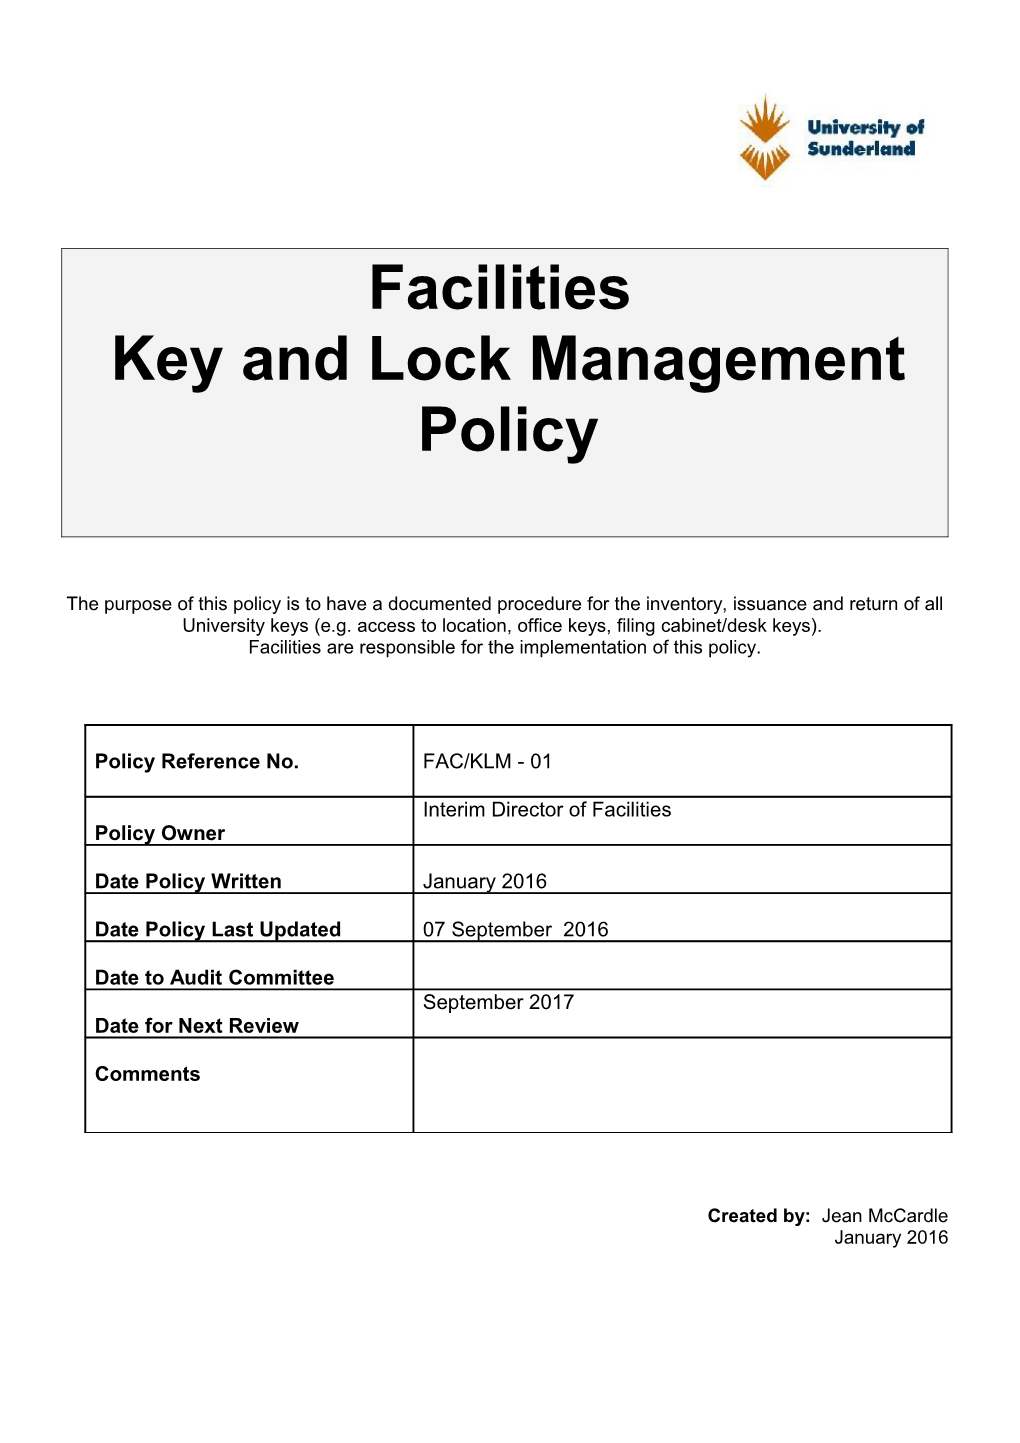 Key and Lock Management Policy